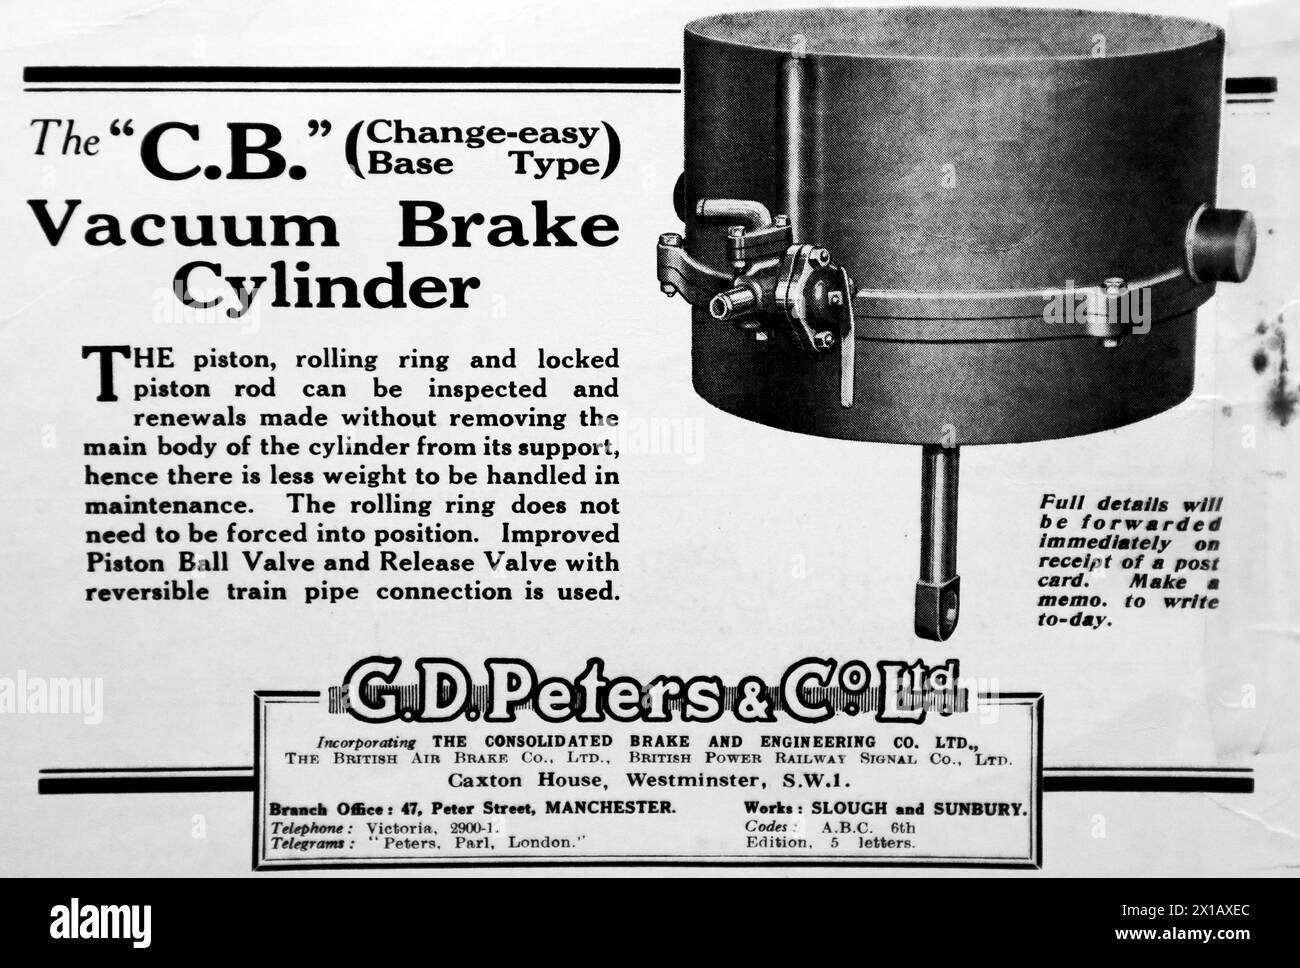 Advertisement for G. D. Peters and Co Ltd of London, Manchester and Slough, for the C. B. Vacuum Brake Cylinder. From an original publication dated 15 May 1924, this helps to give an insight into public transport, and the railways in particular, of the 1920s. Stock Photo